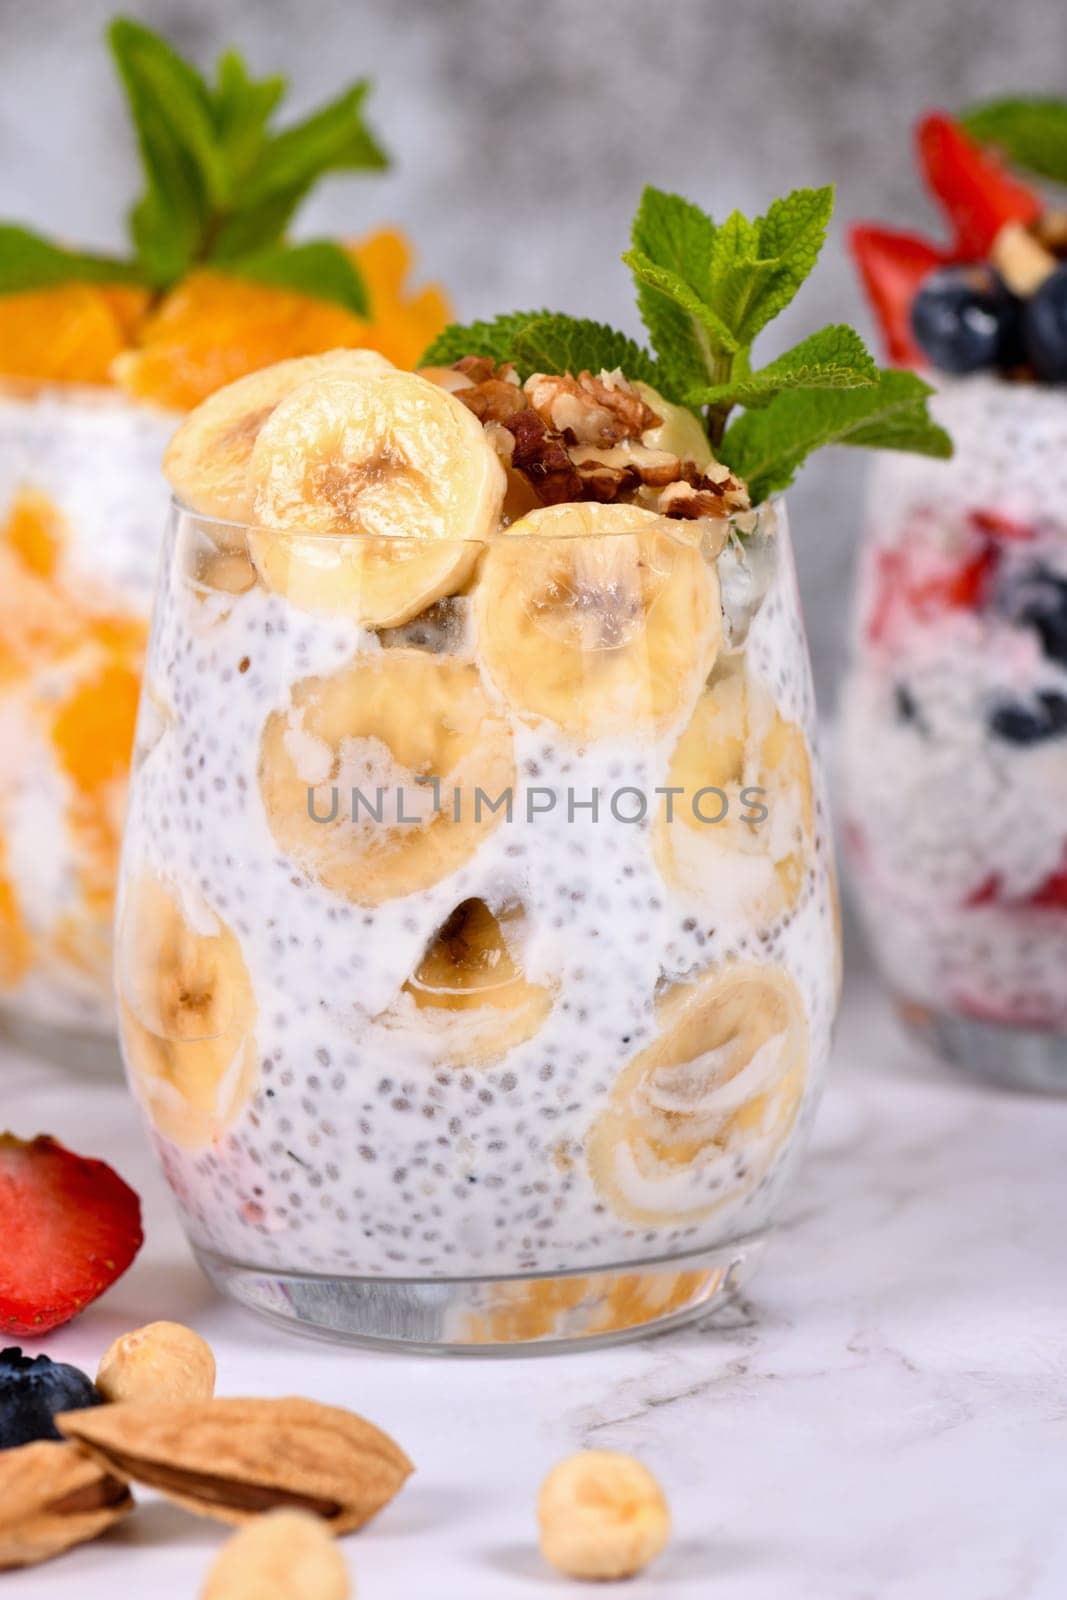 Chia dessert with Greek yogurt and banana slices and nuts. Absolutely helpful. Perfect breakfast or snack. Suitable for vegans and gluten free.